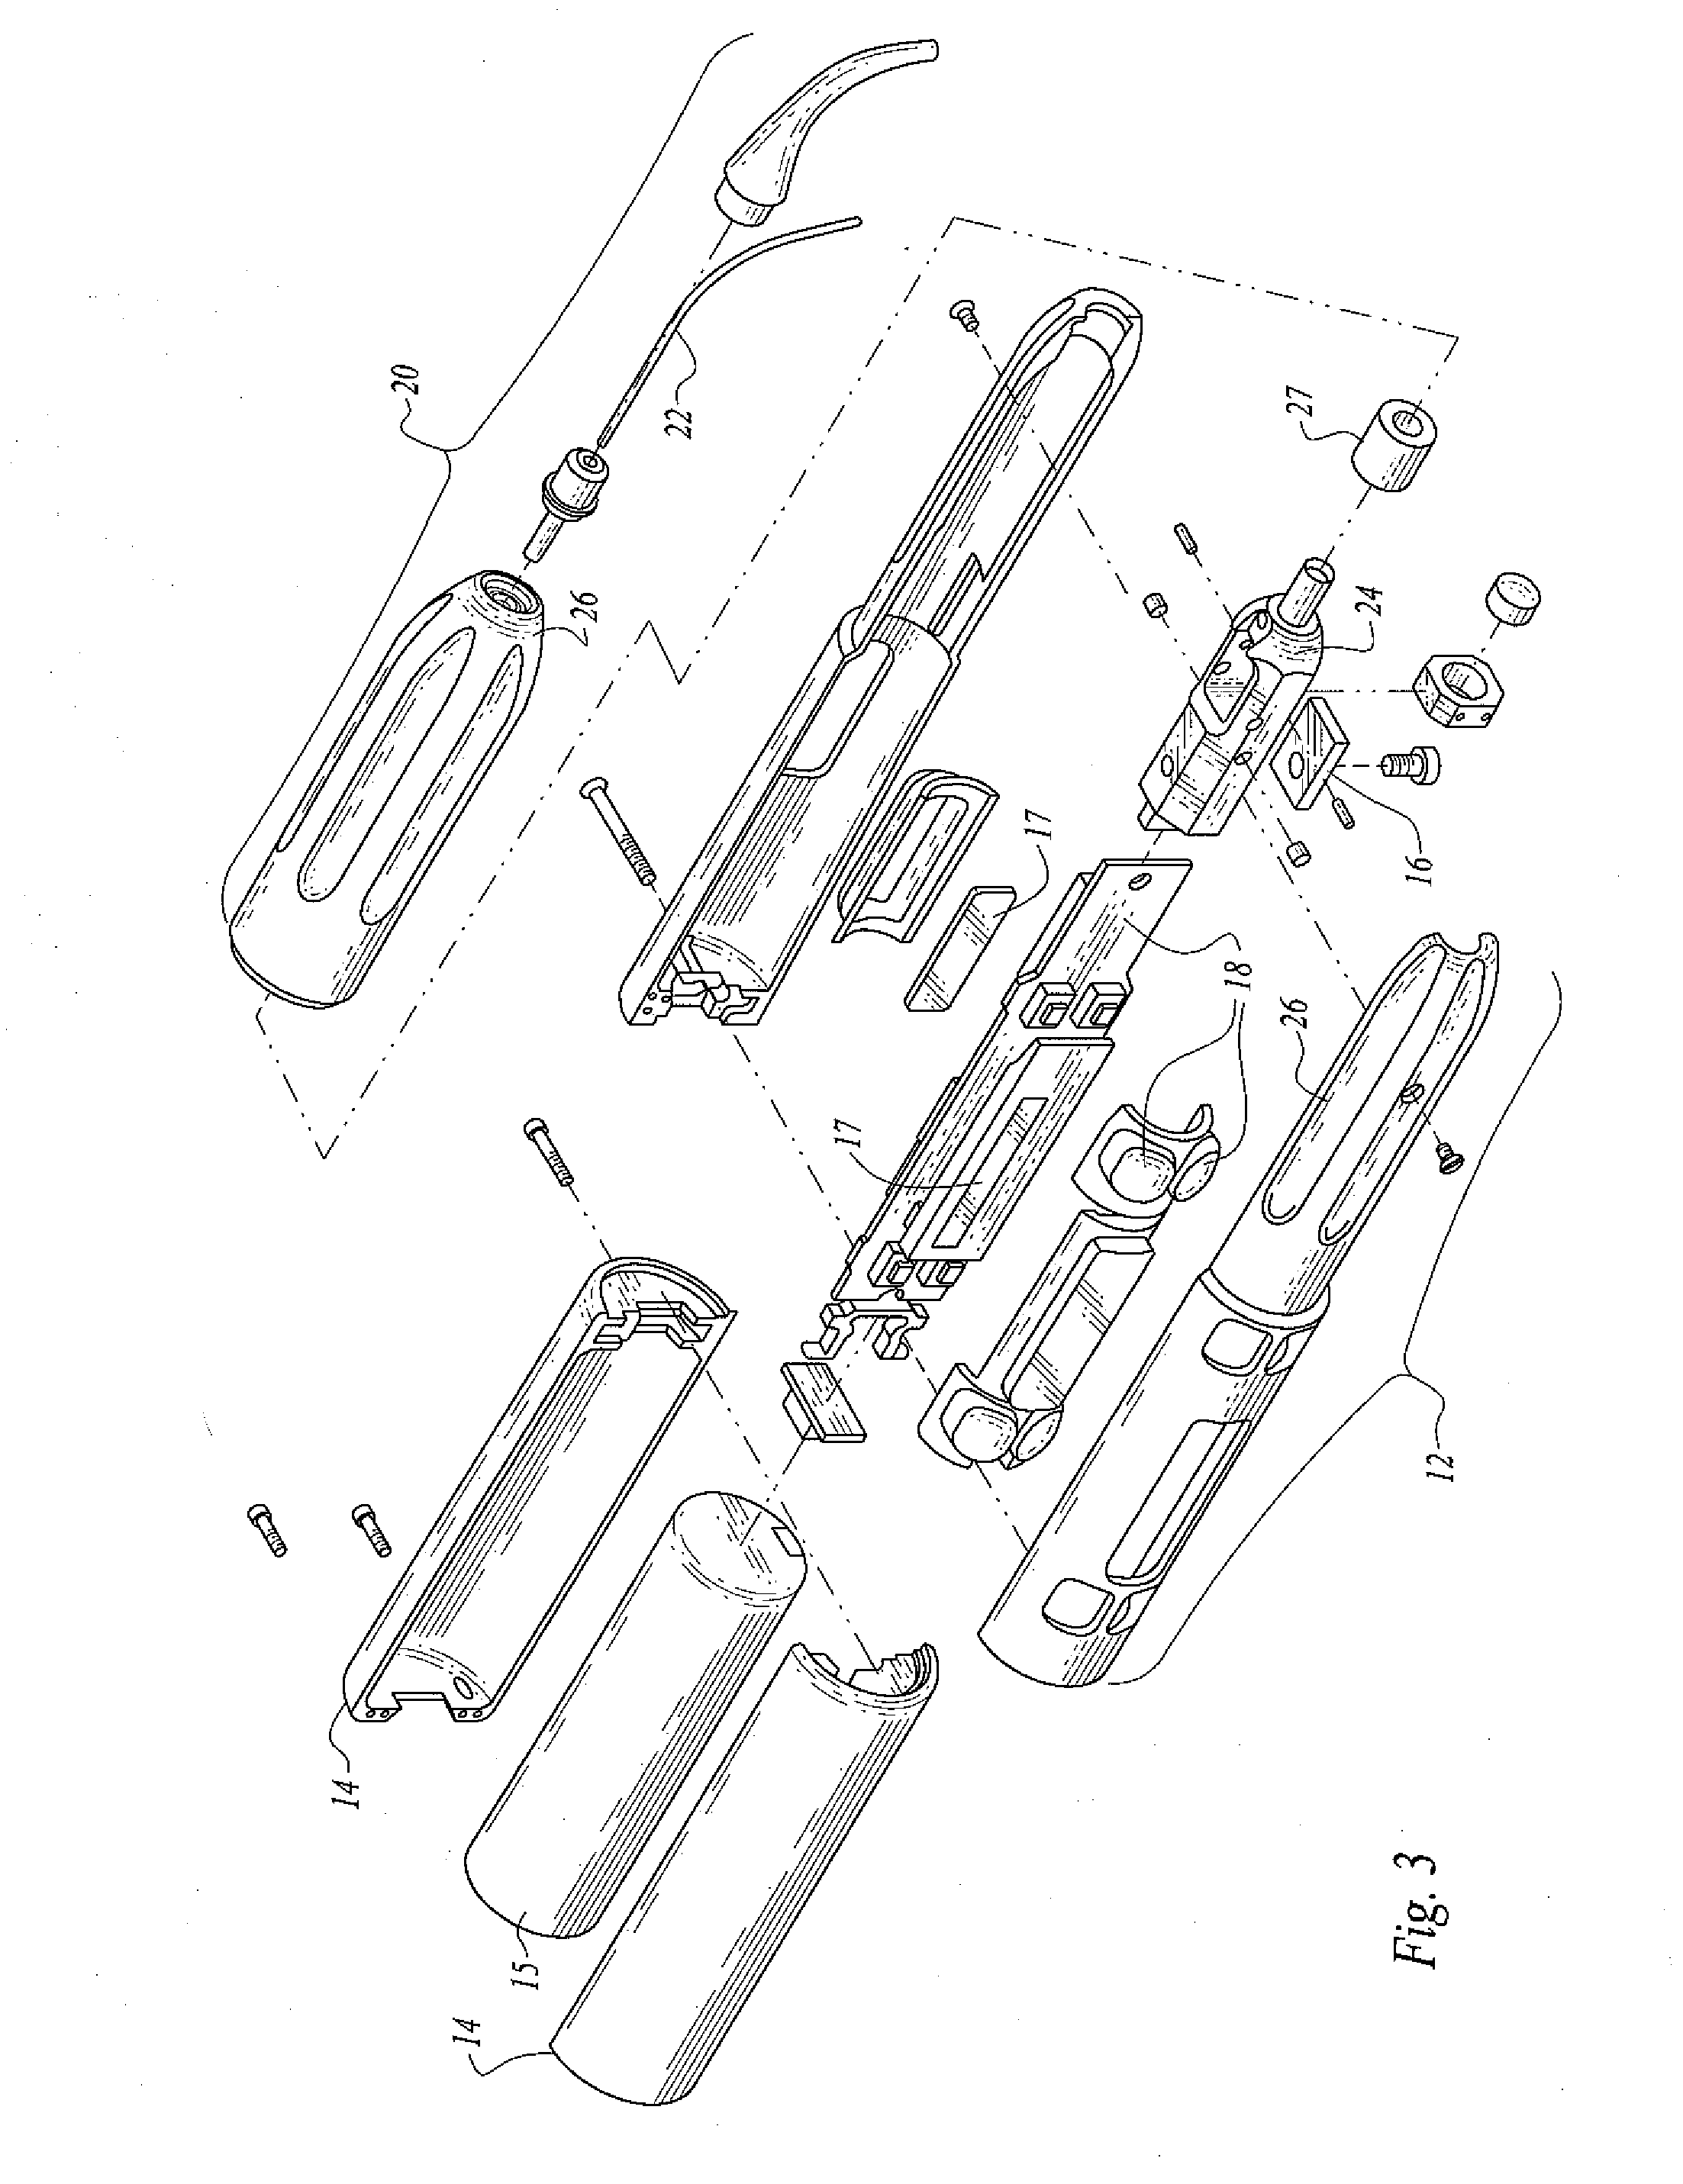 Hand-held portable laser surgical device